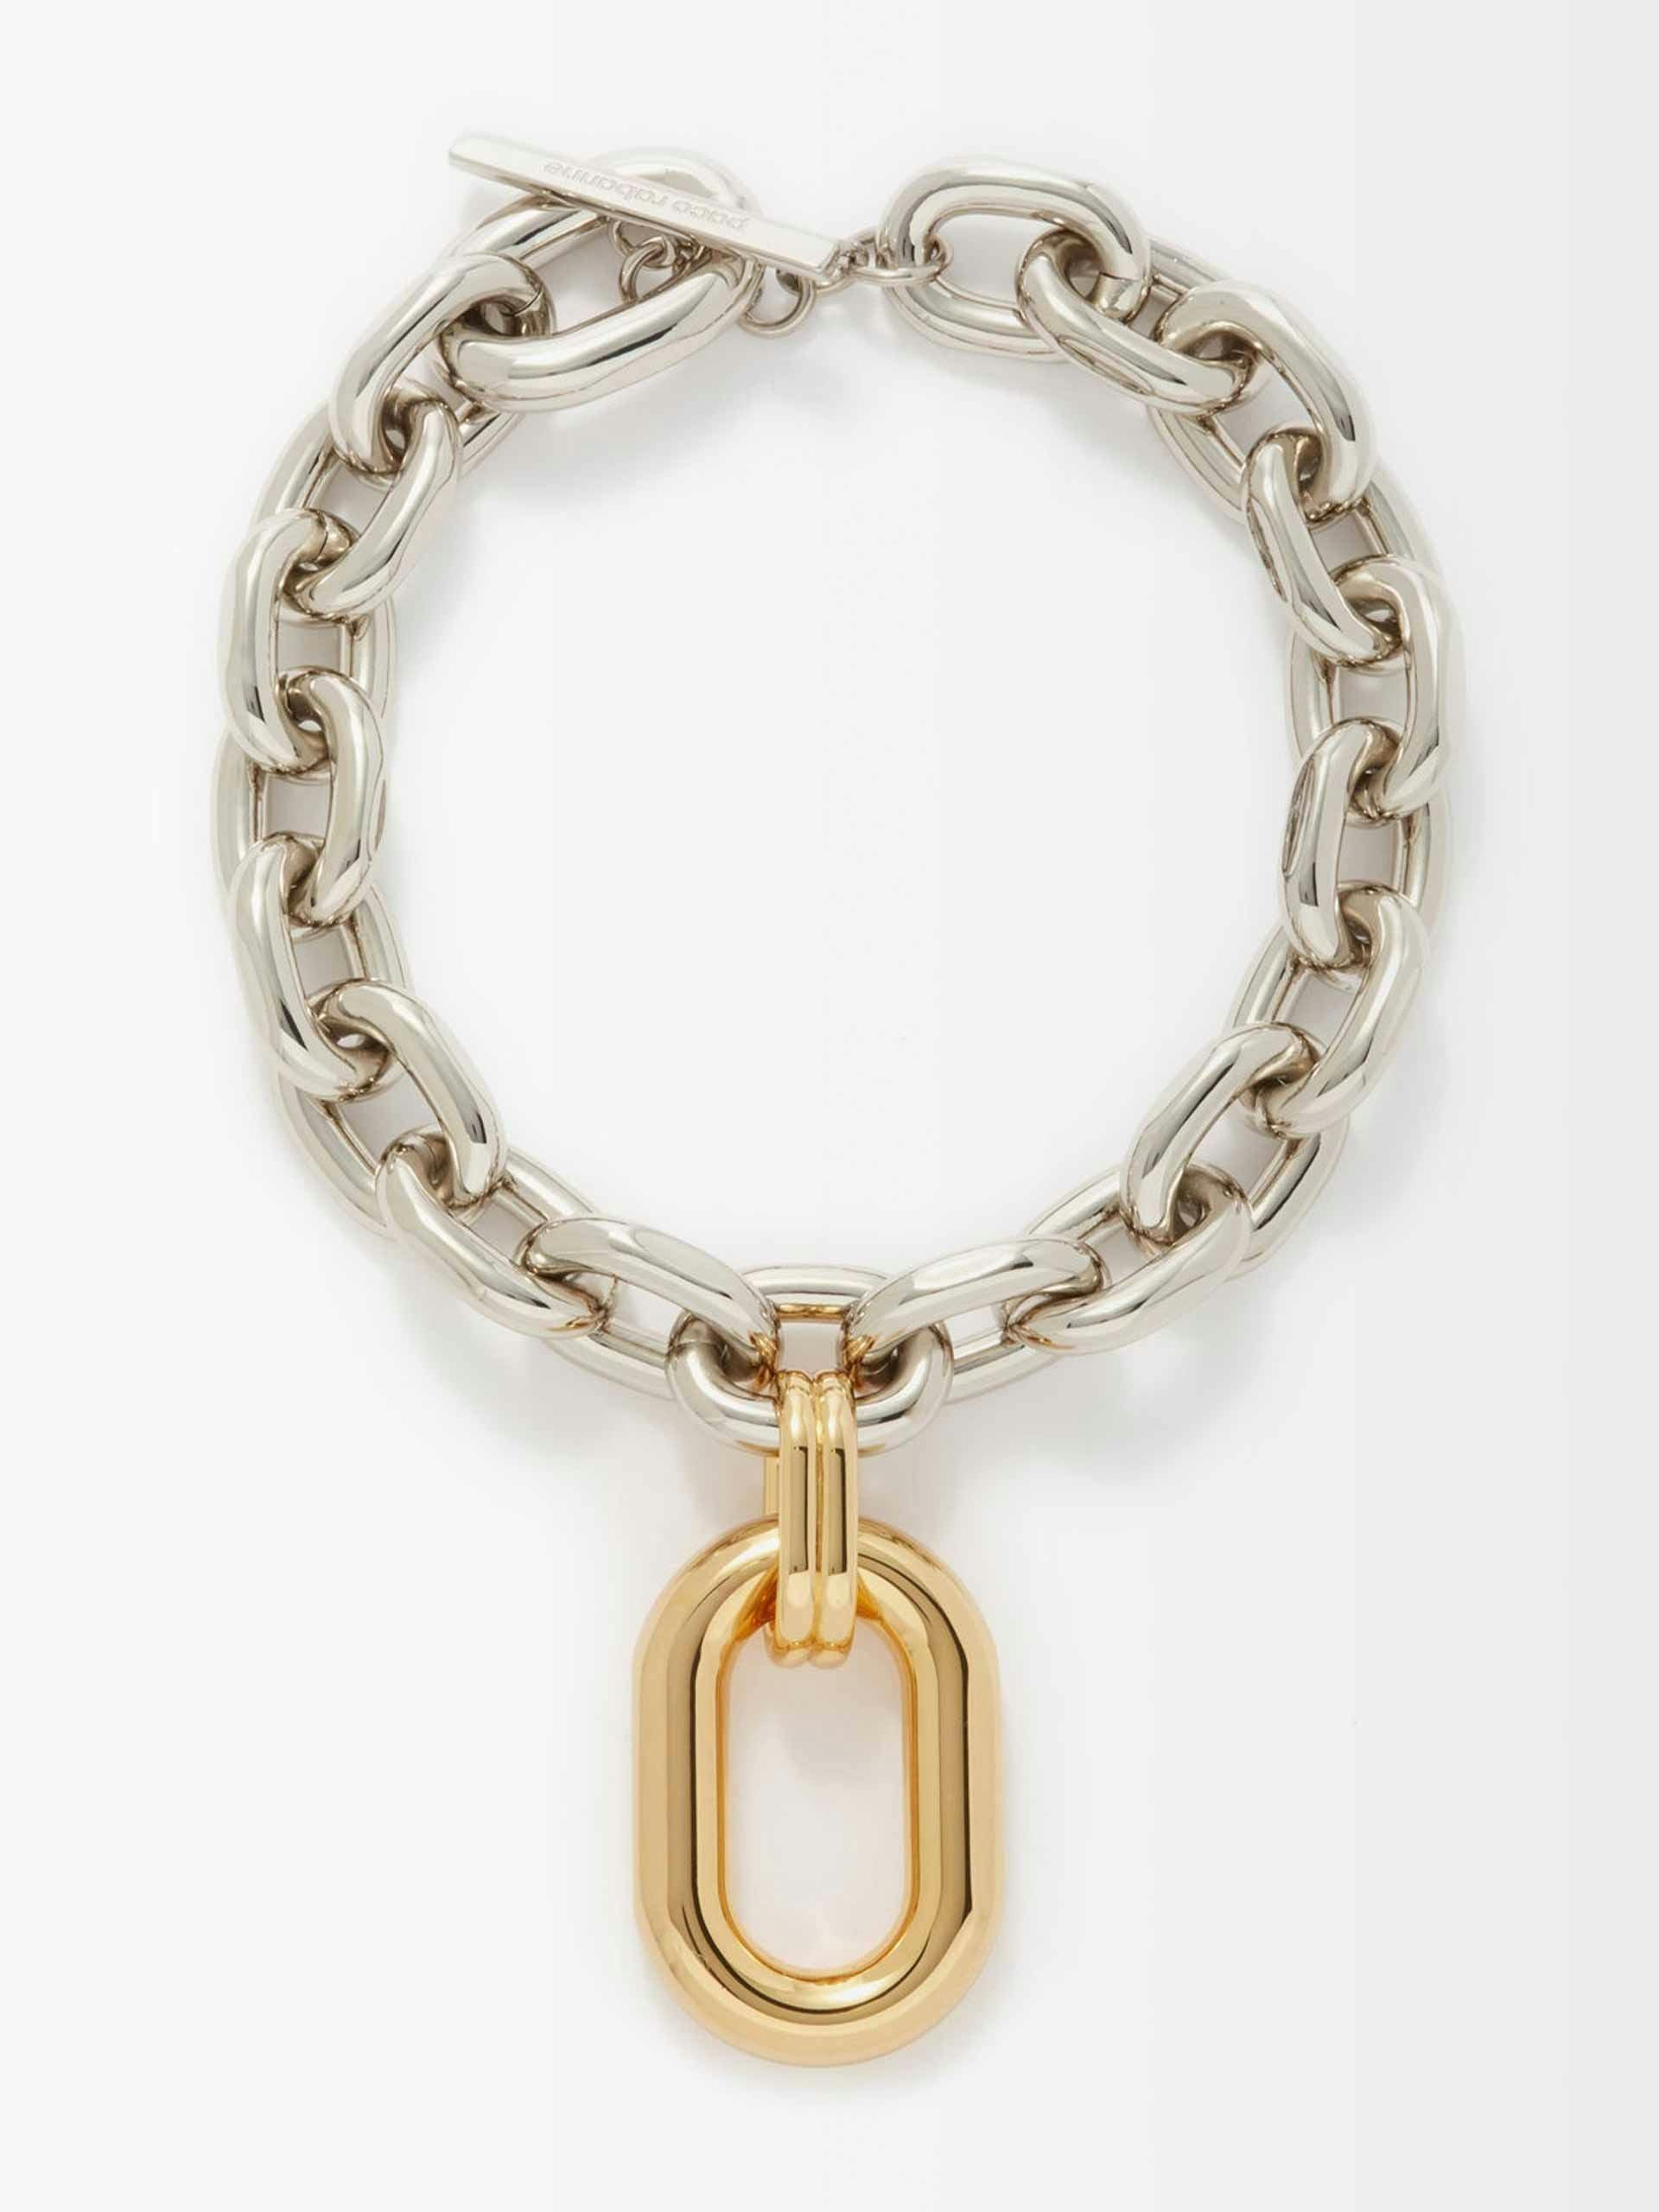 XL Link chain necklace